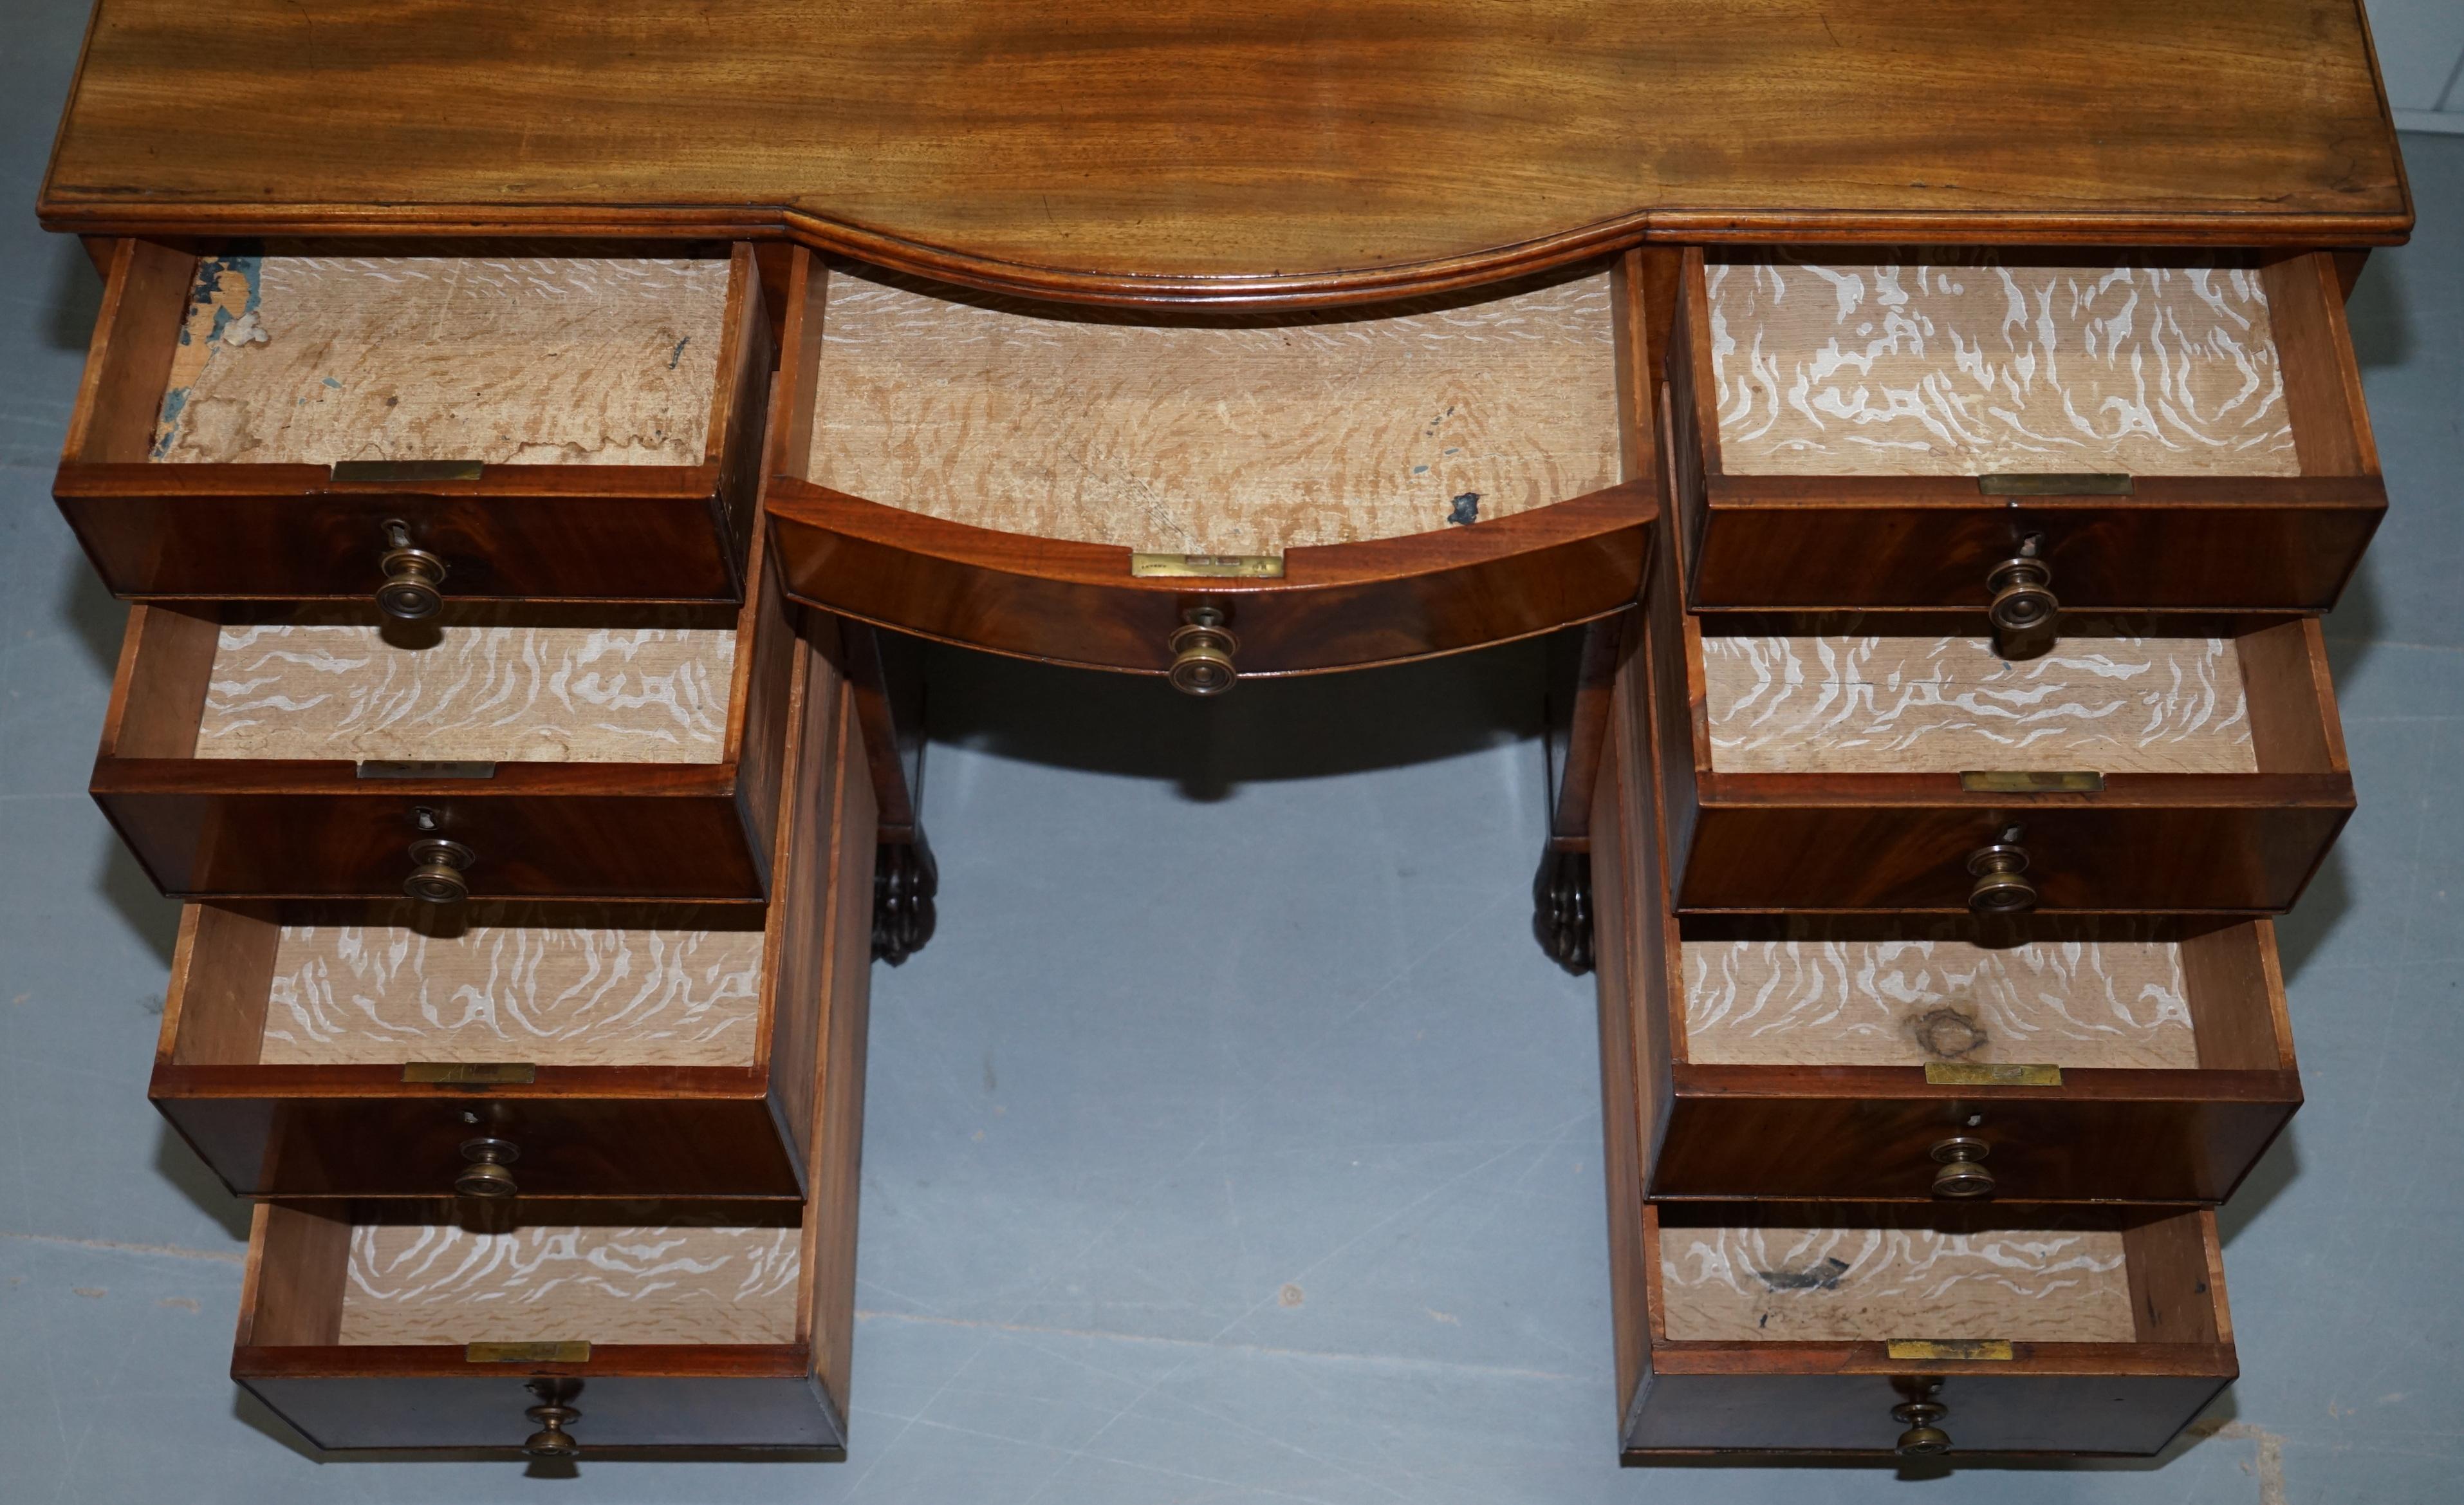 Exquisite Regency Period 1815 Hardwood Kneehole Desk with Lion Hairy Paw Feet For Sale 11